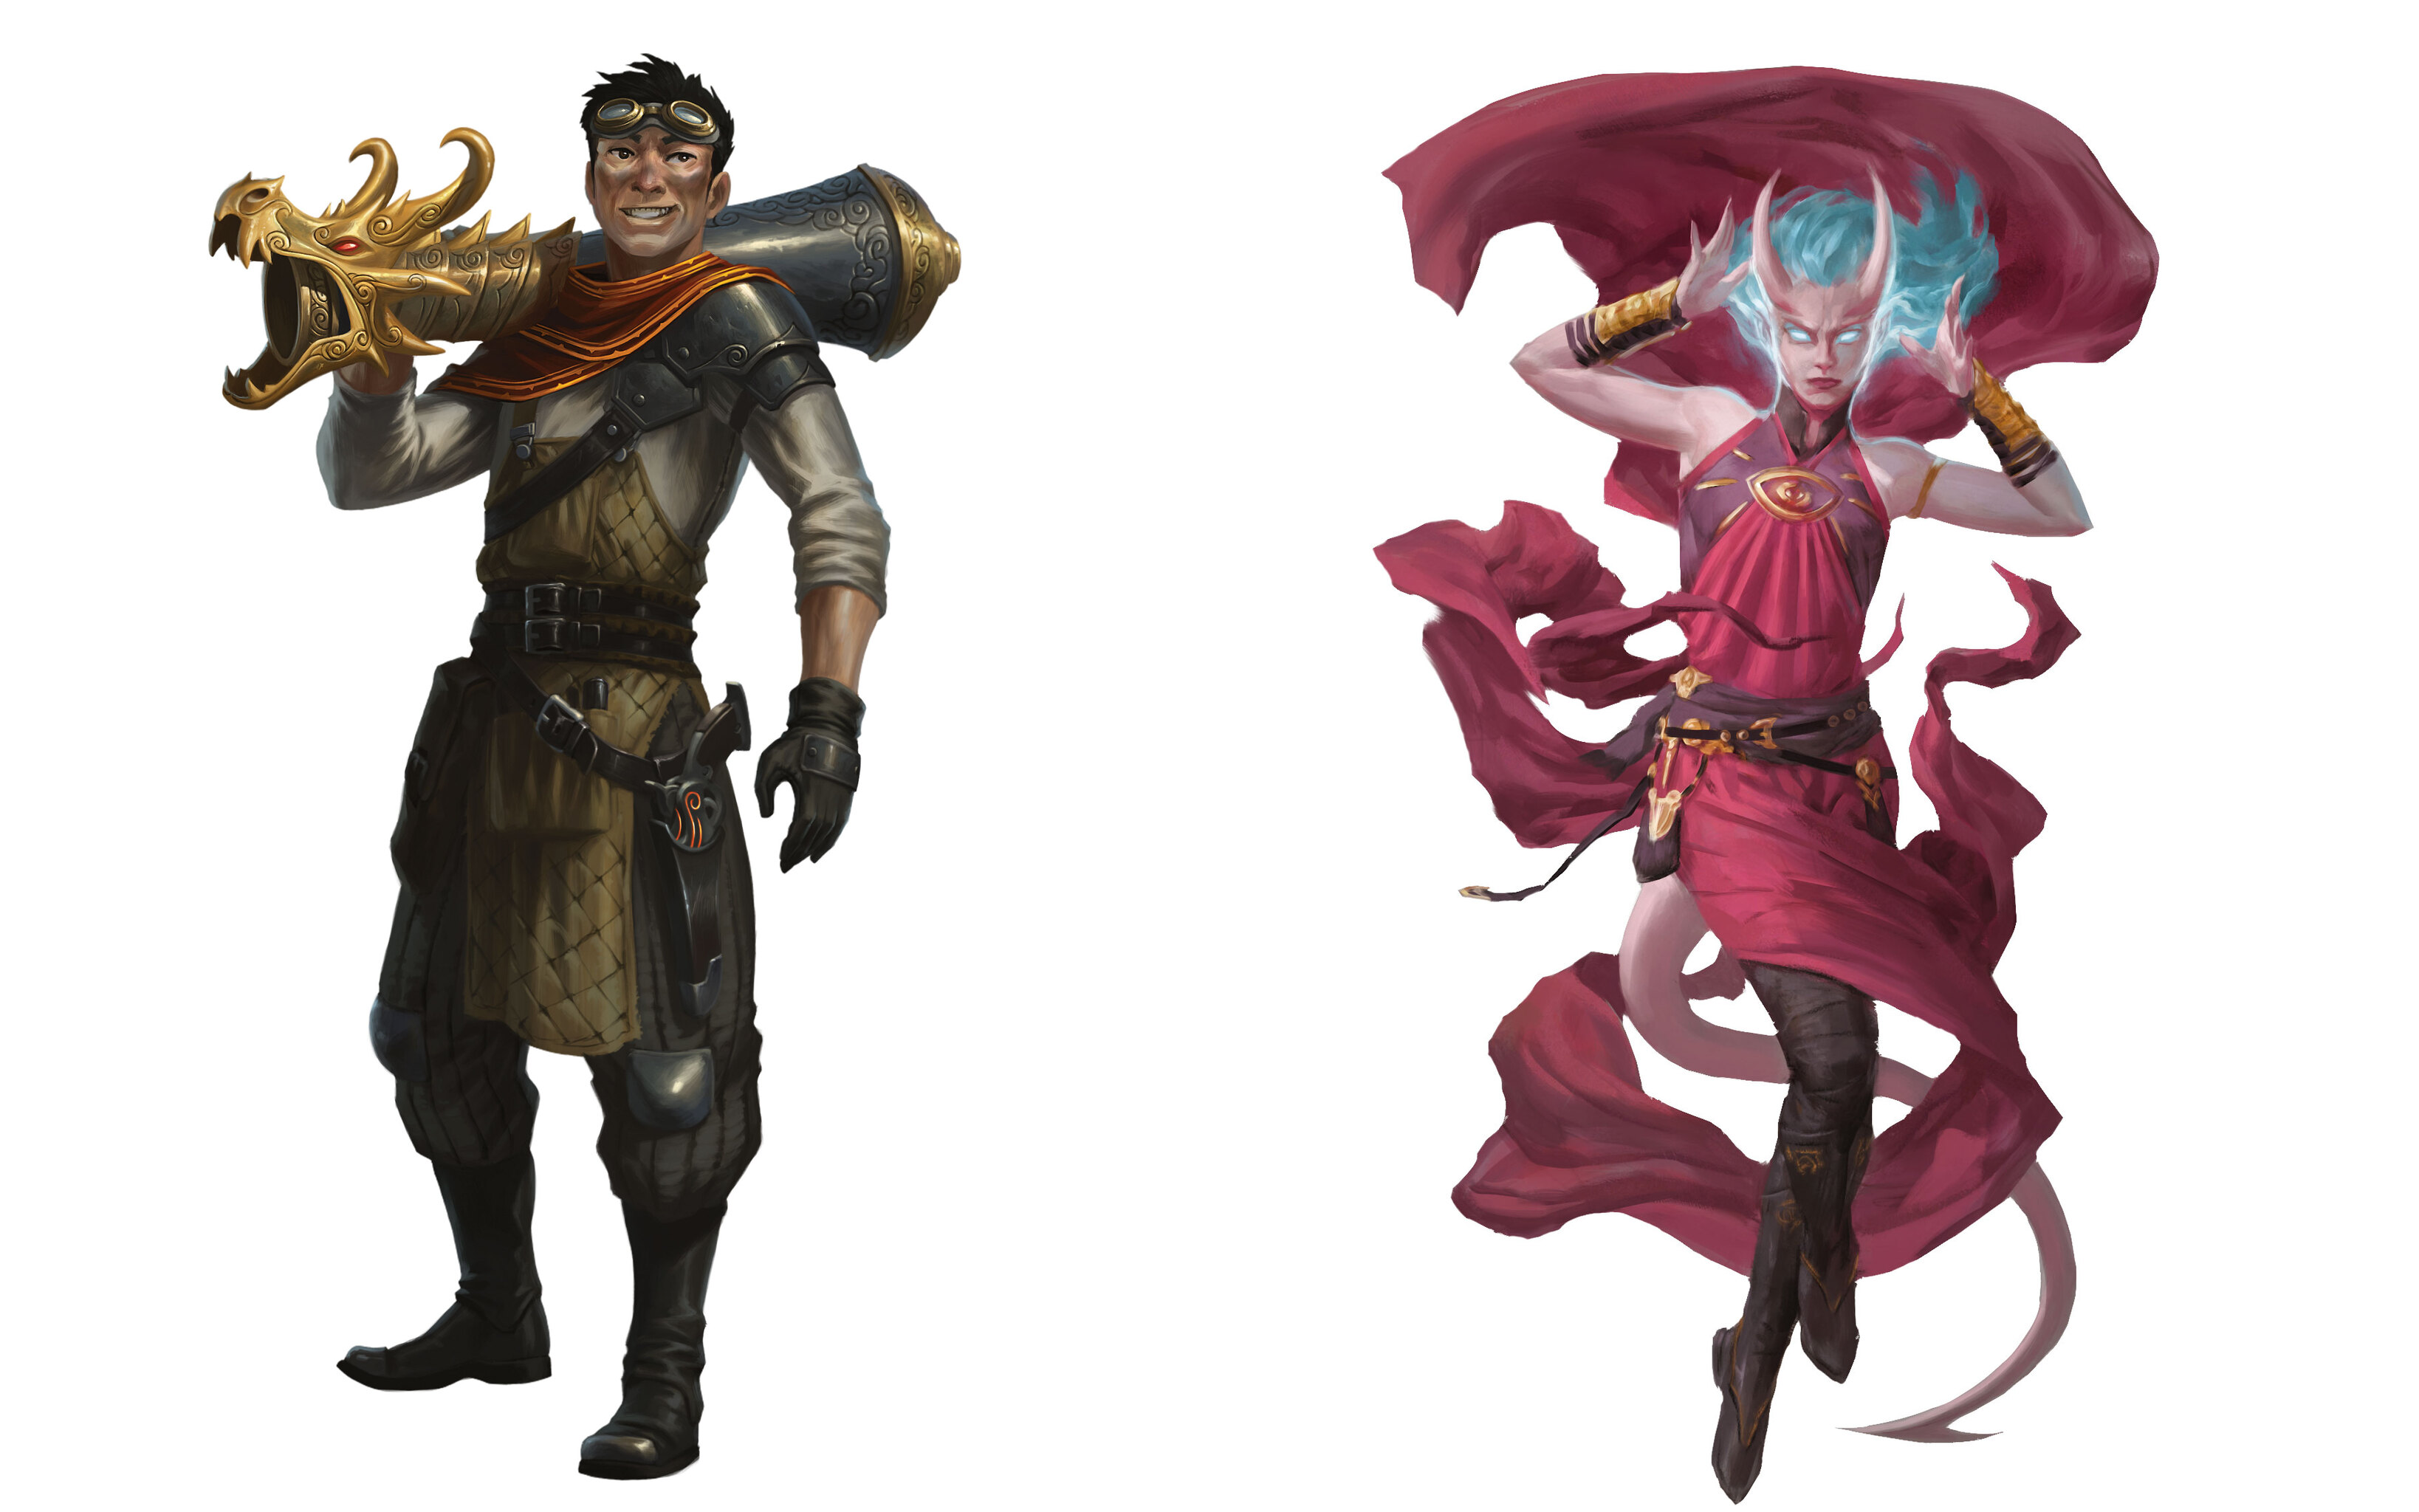 A Human Artillerist Artificer and a Tiefling Psionic Soul Sorcerer, just two new subclass additions being inducted into Tasha's. (Image: Brian Valeza and Kieran Yanner/Wizards of the Coast)